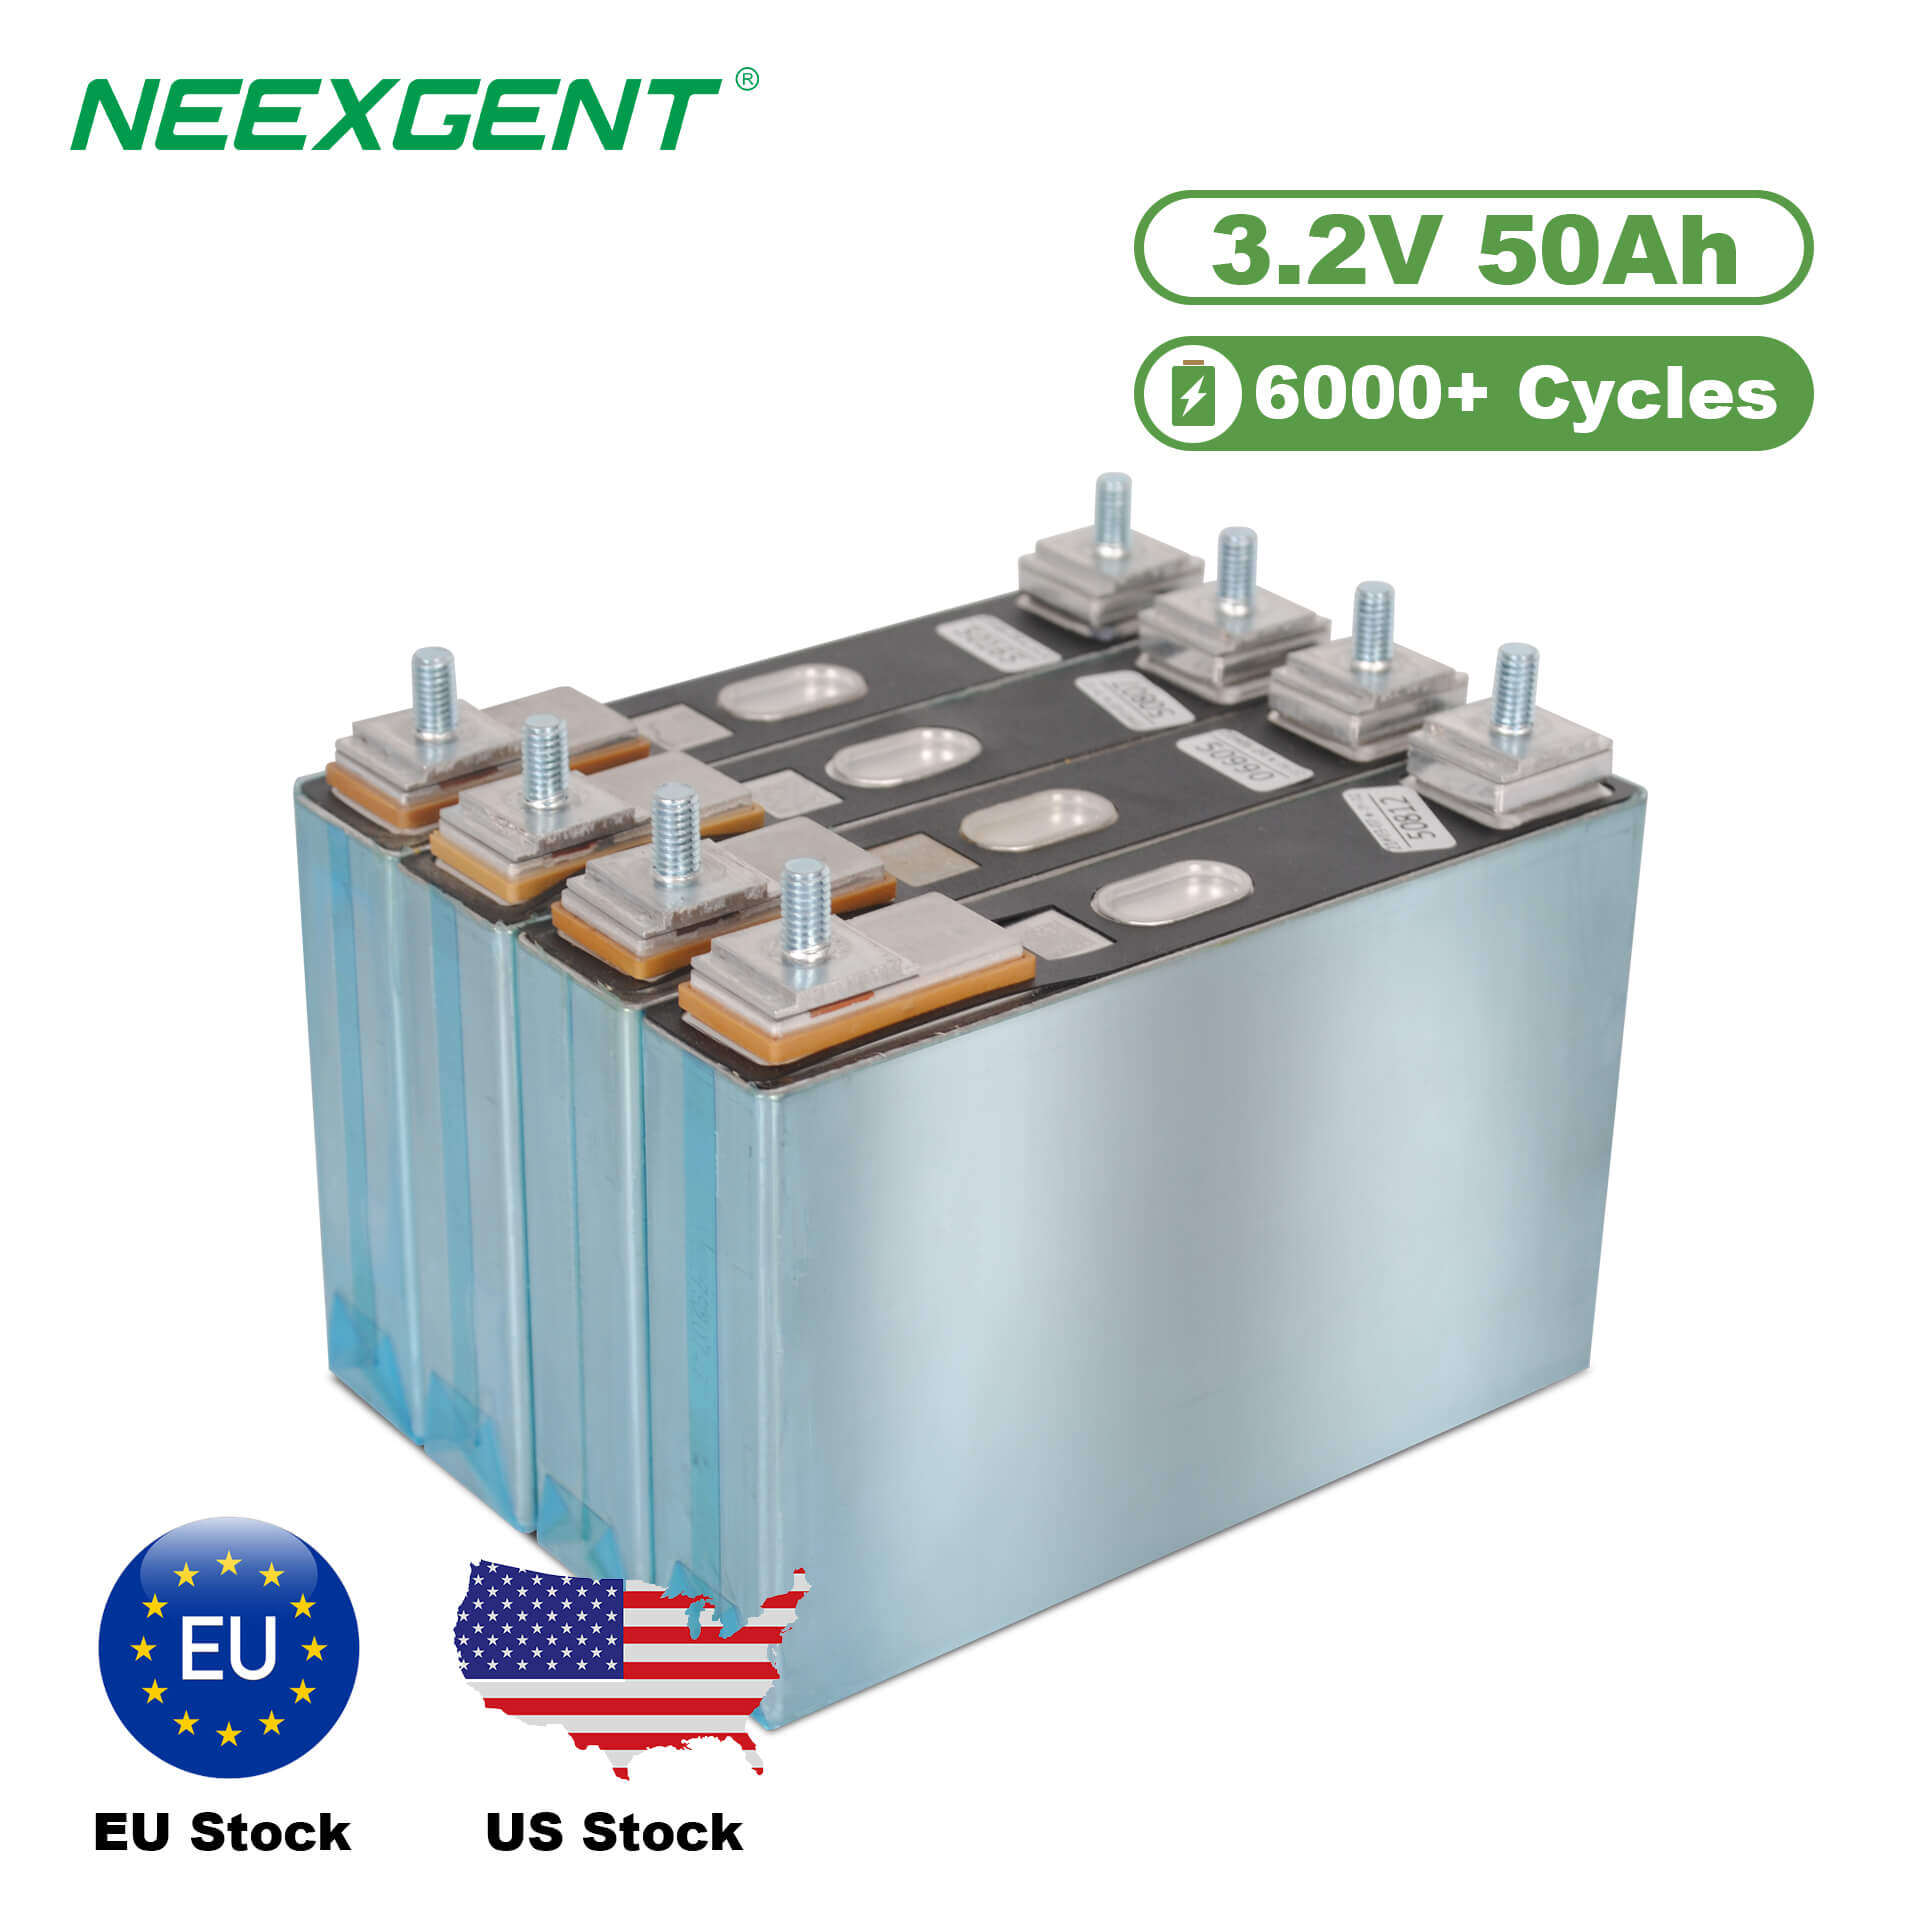 Neexgent LifePO4 Battery Cell 3.2V 50AH Lithium Iron Phosphate Battery For RV Solar Energy